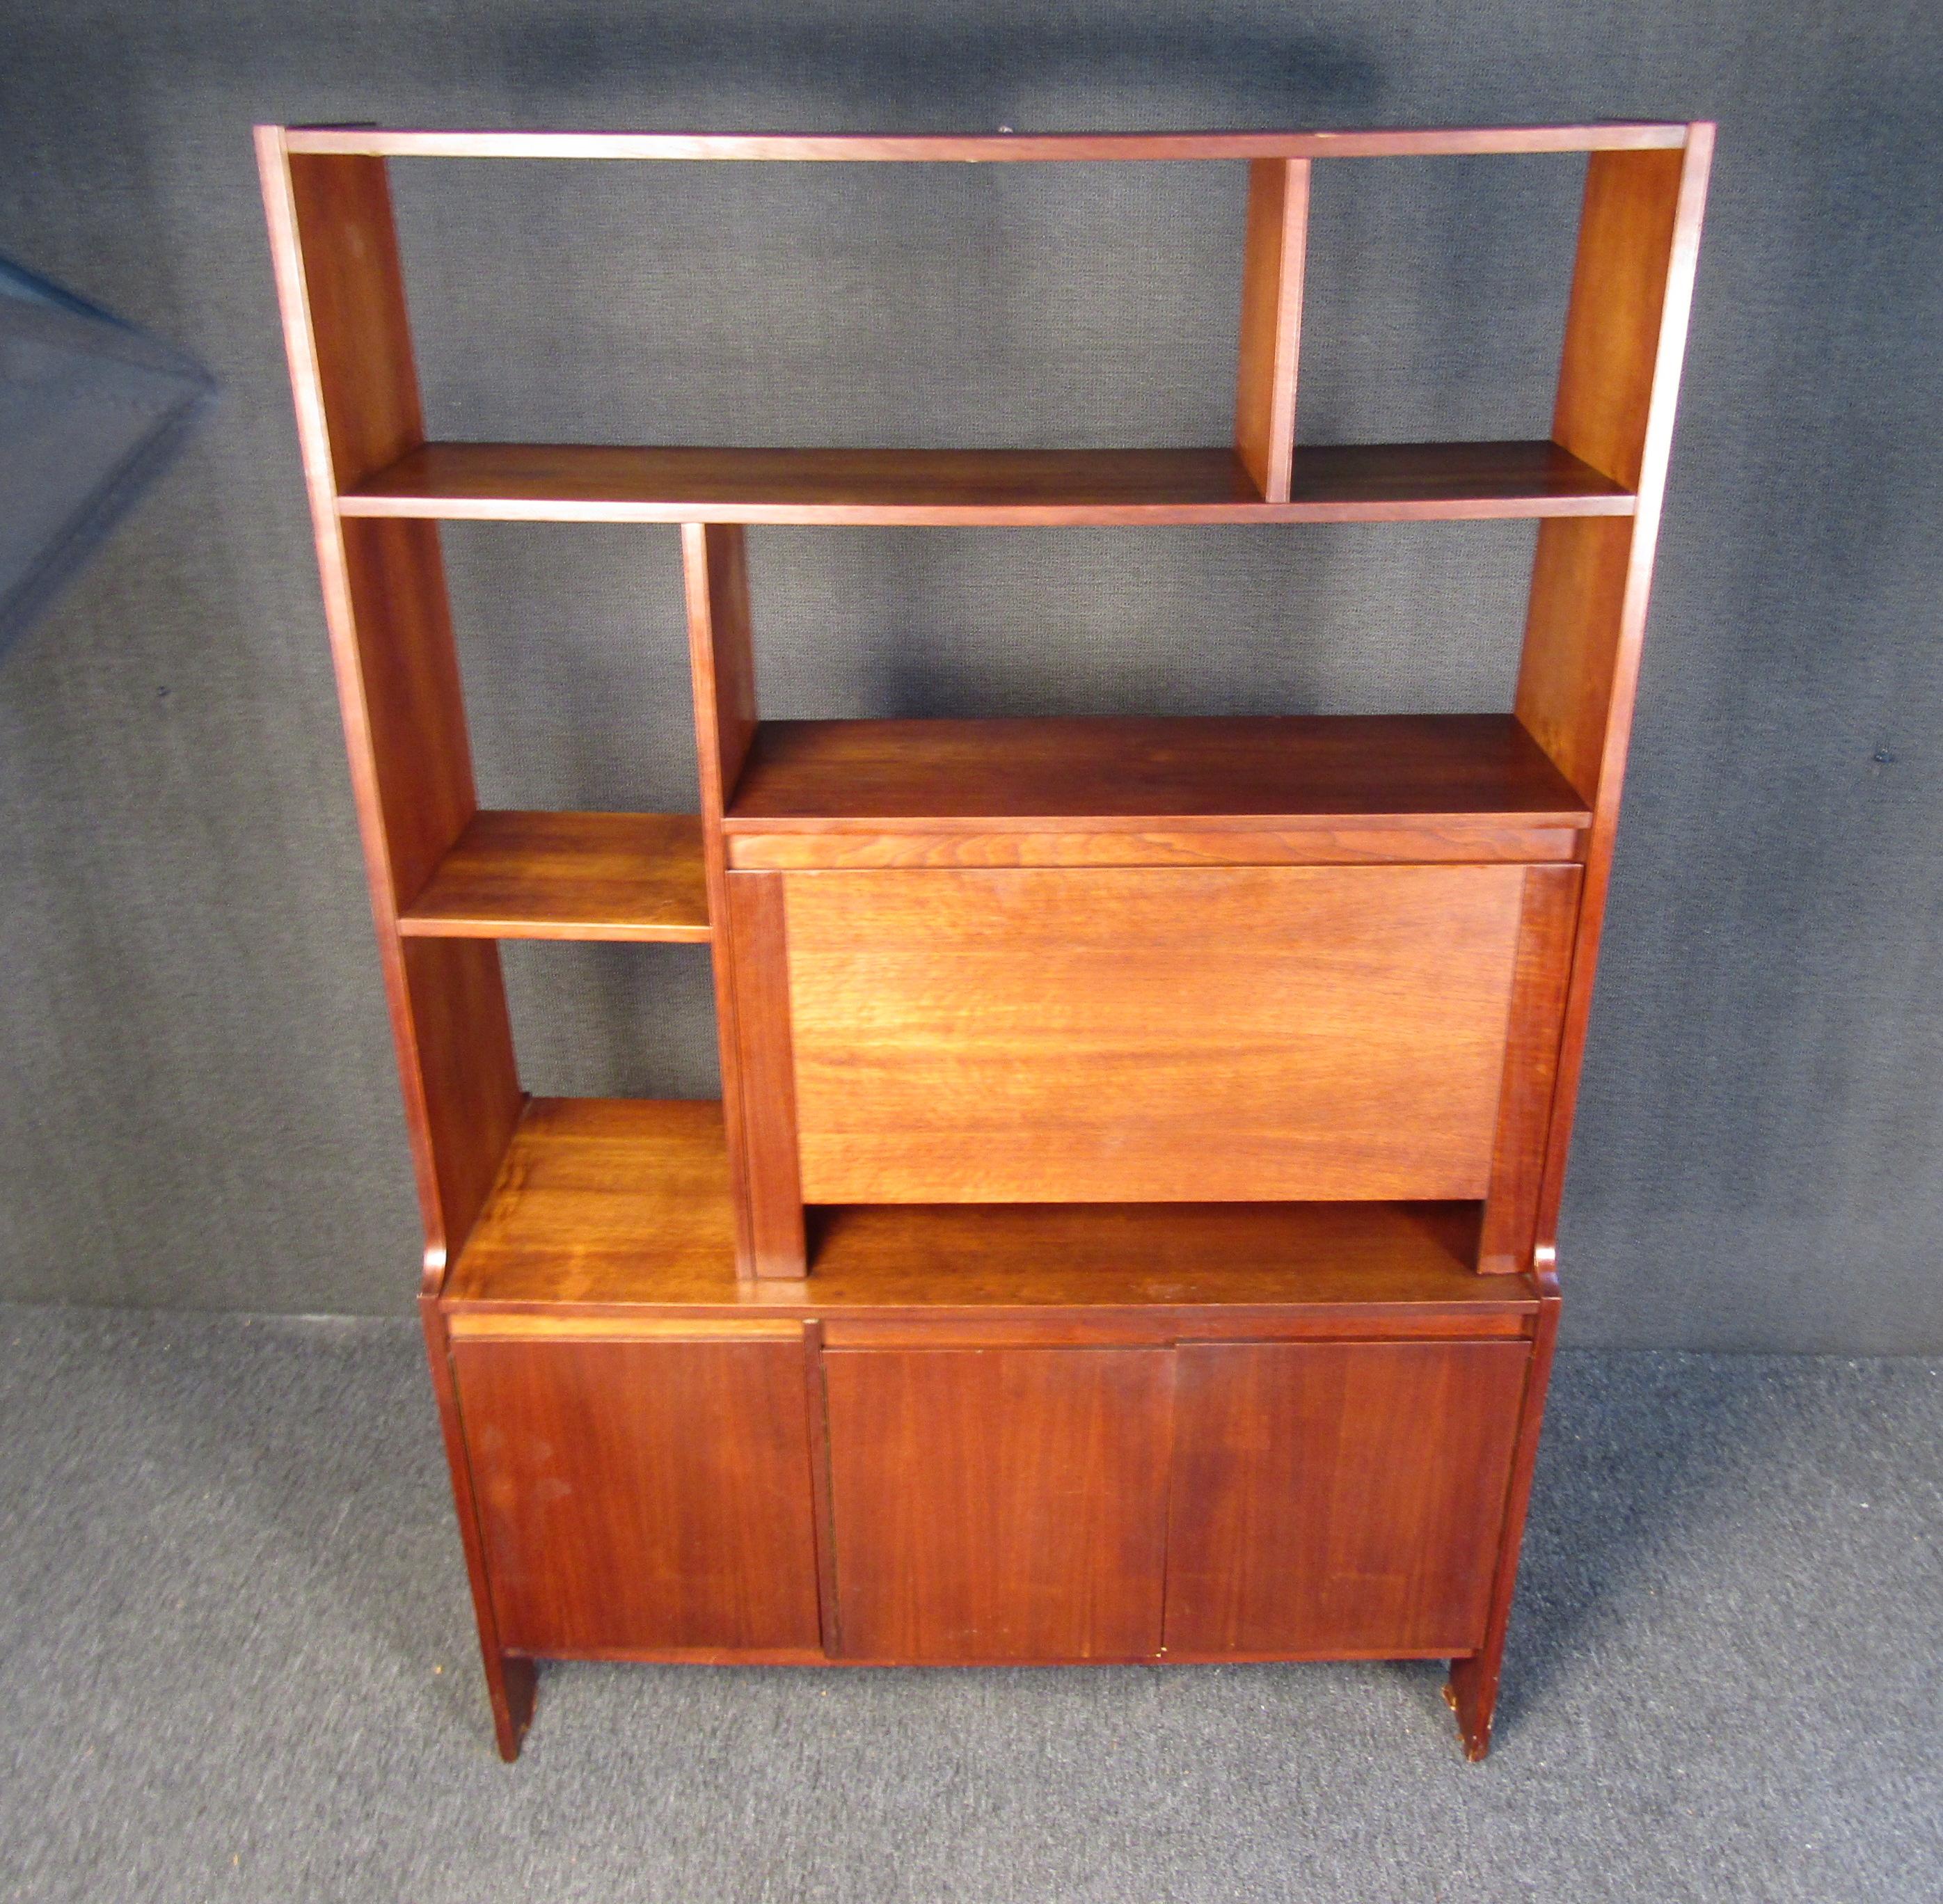 Perfect for adding timeless Mid-Century Modern style to any room, this sturdy wall unit can complement personal decorations arranged on its shelves and add organization to a space. Please confirm item location with seller (NY/NJ).